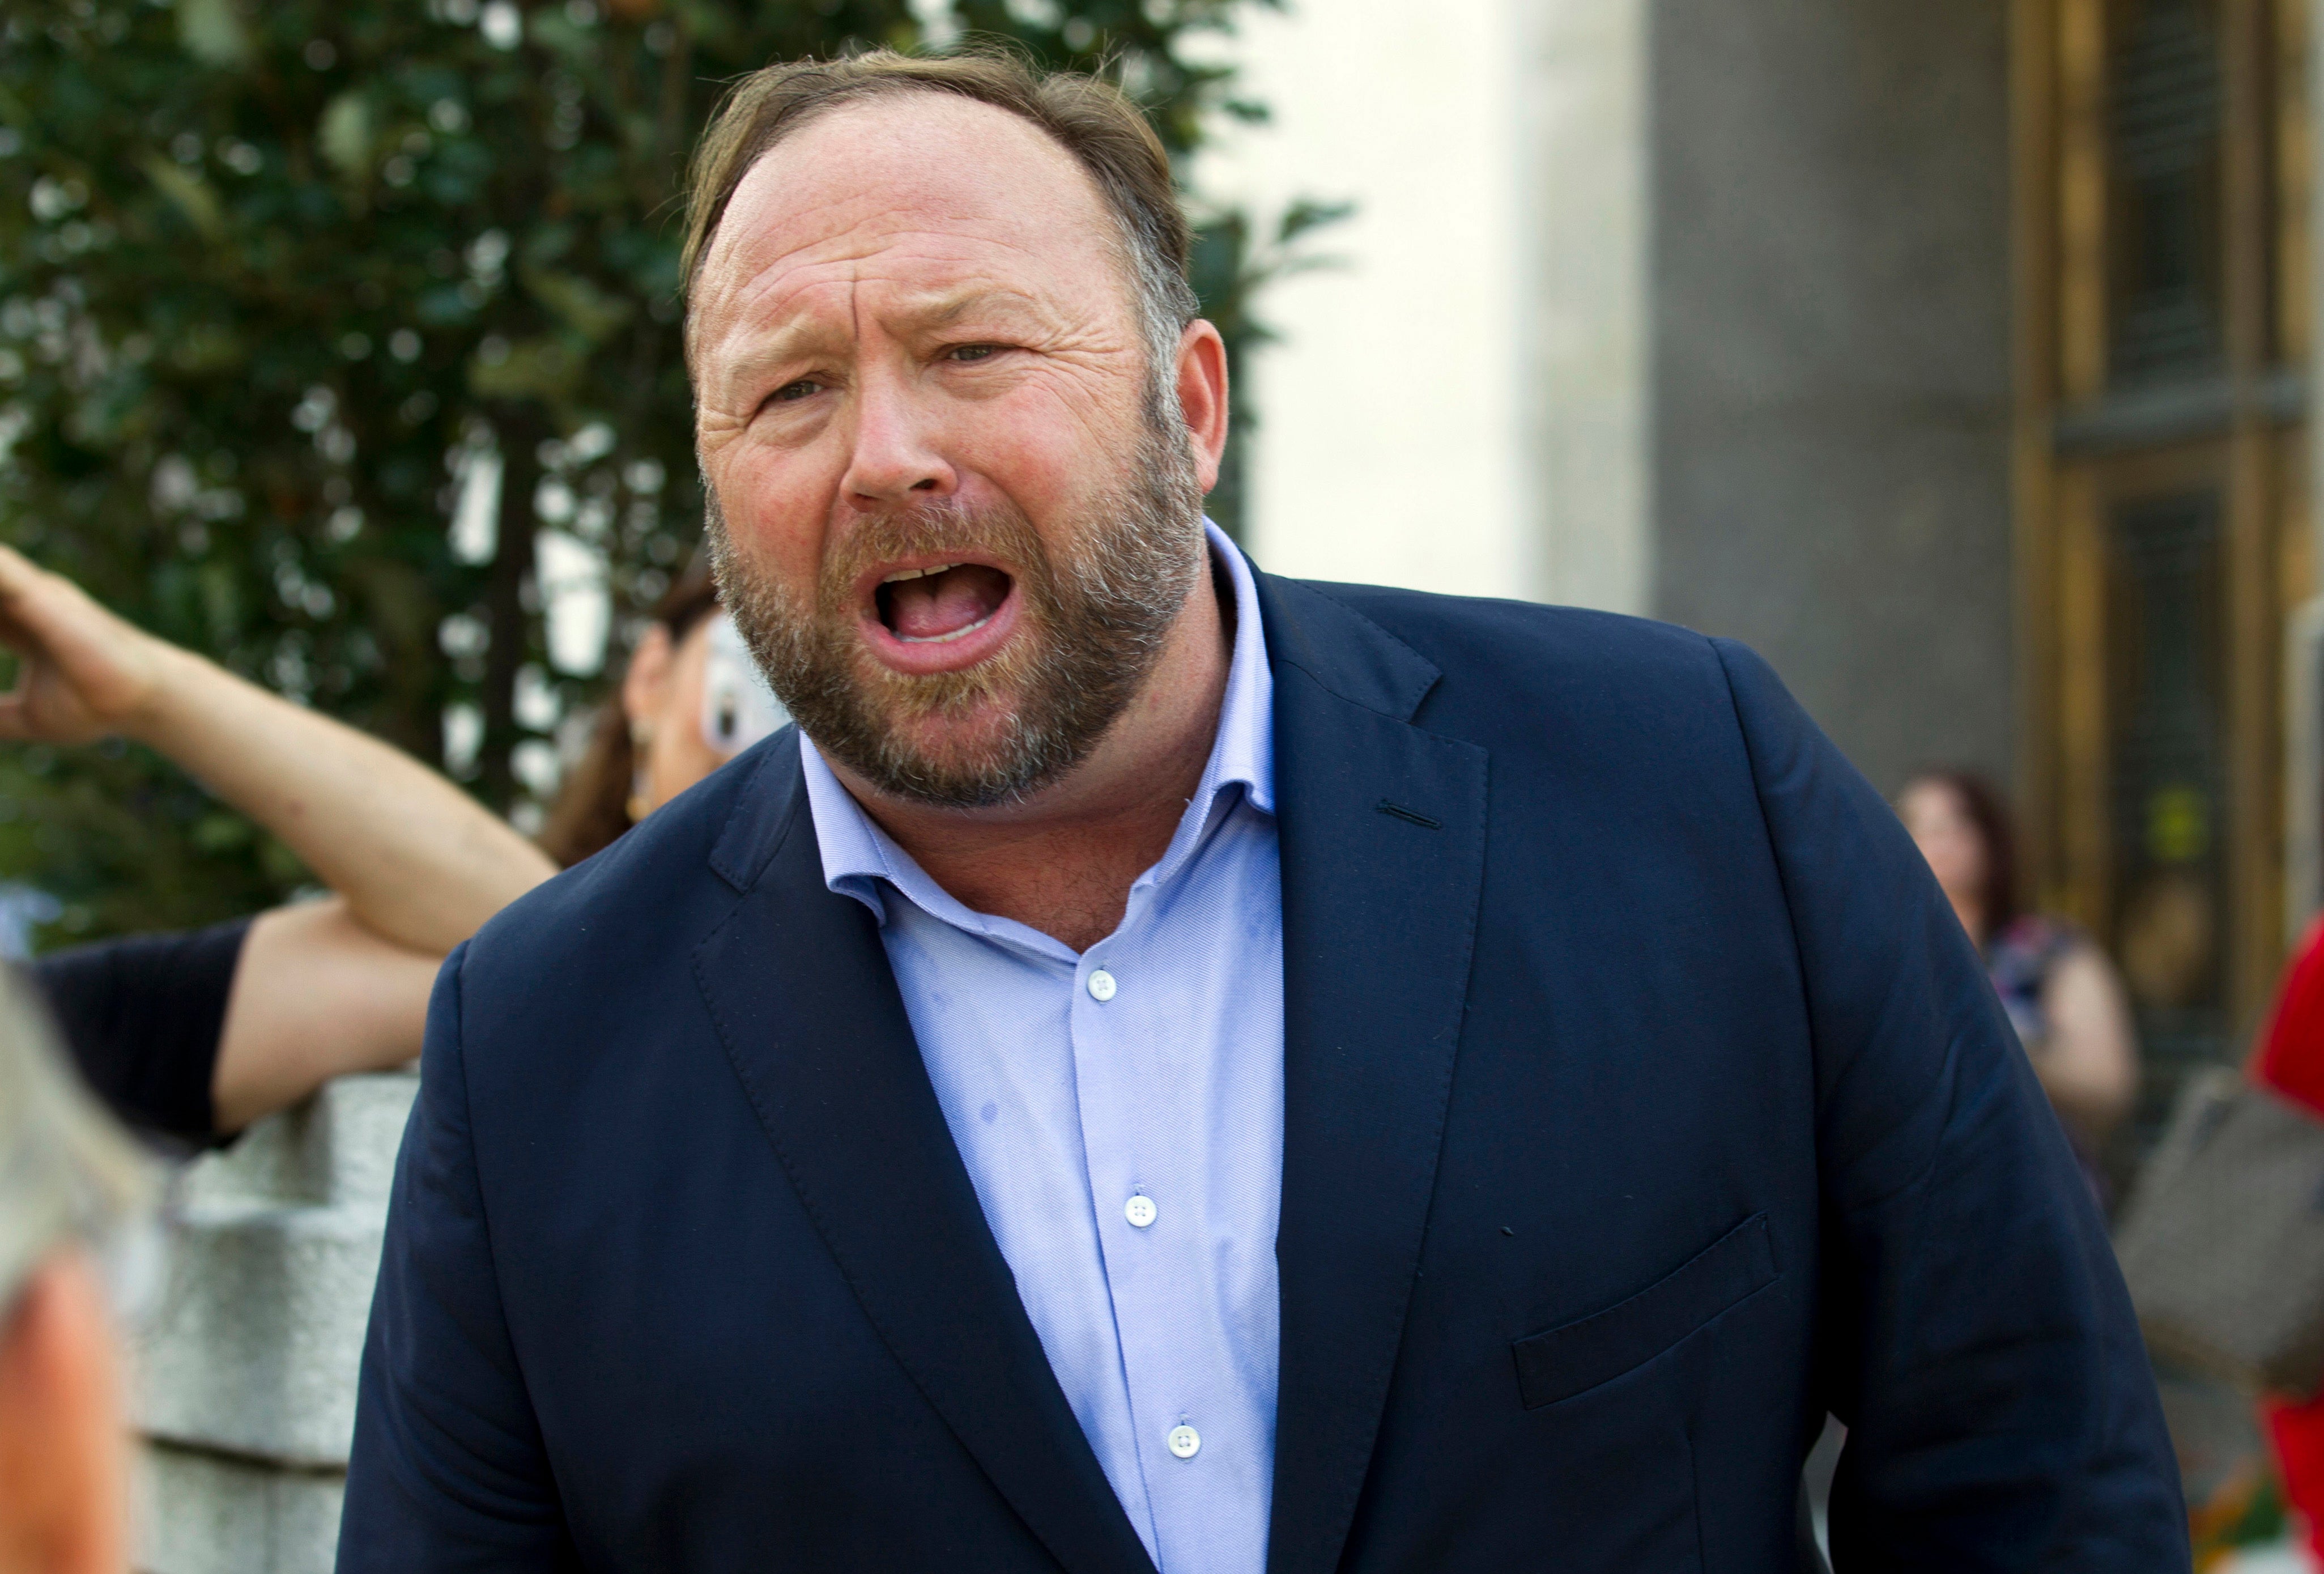 Alex Jones will have to pay tens of thousands of dollars in fines for failing to attend a deposition, a judge has ruled